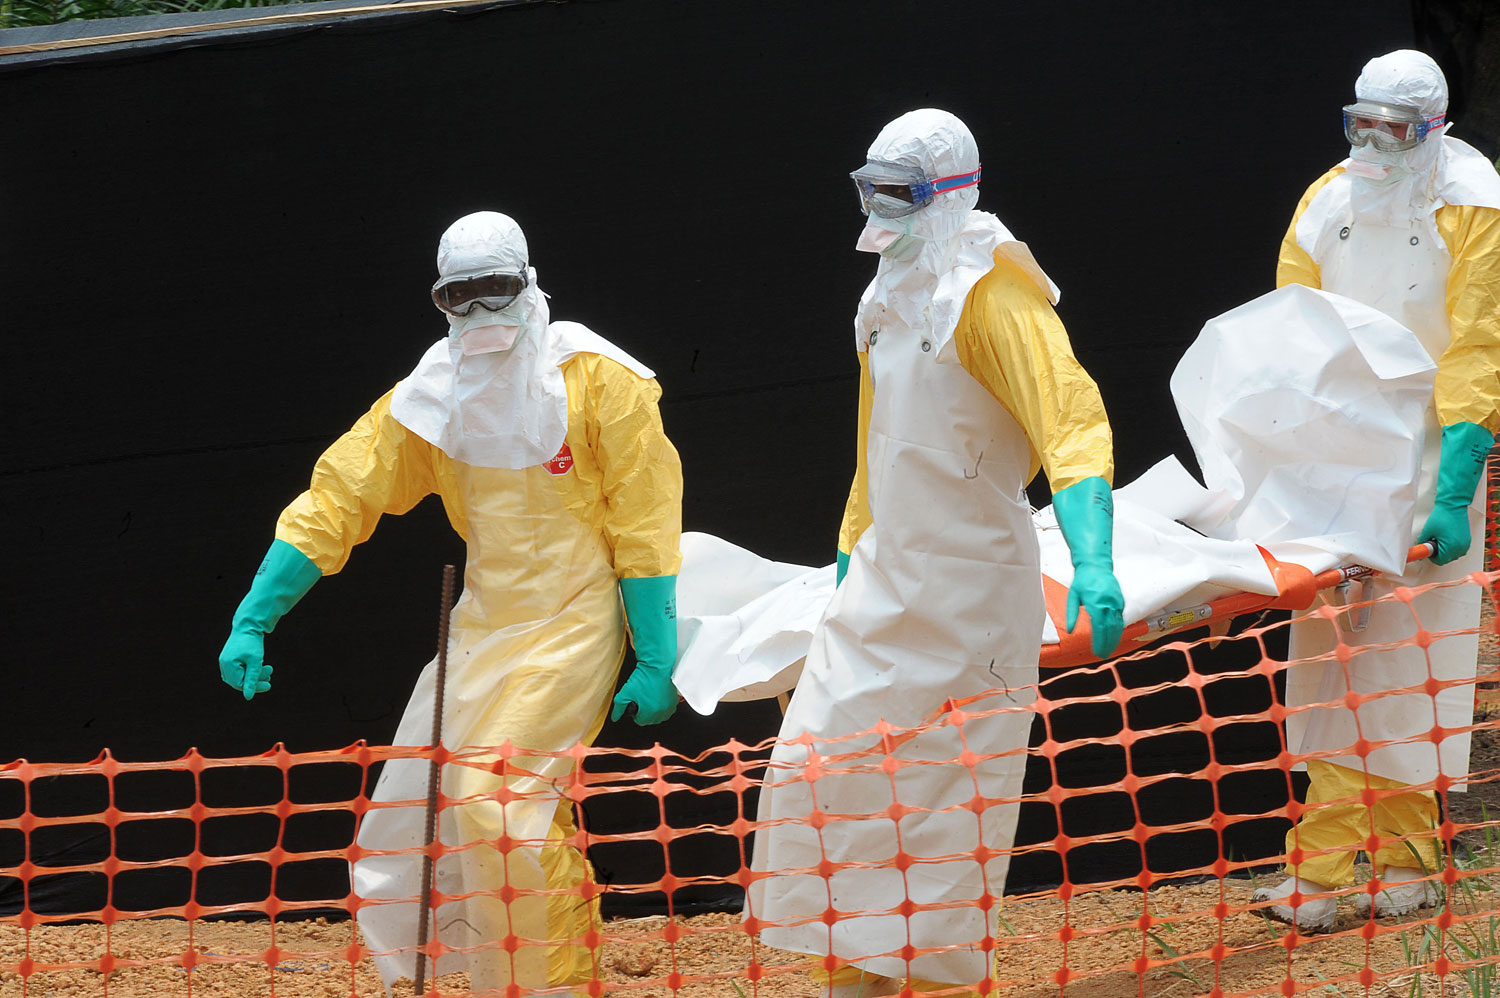 Doctors Without Borders staff carrying the body of a person killed by viral hemorrhagic fever at a center for victims of the Ebola virus in Gueckedou on April 1, 2014. (Seyllou—AFP/Getty Images)